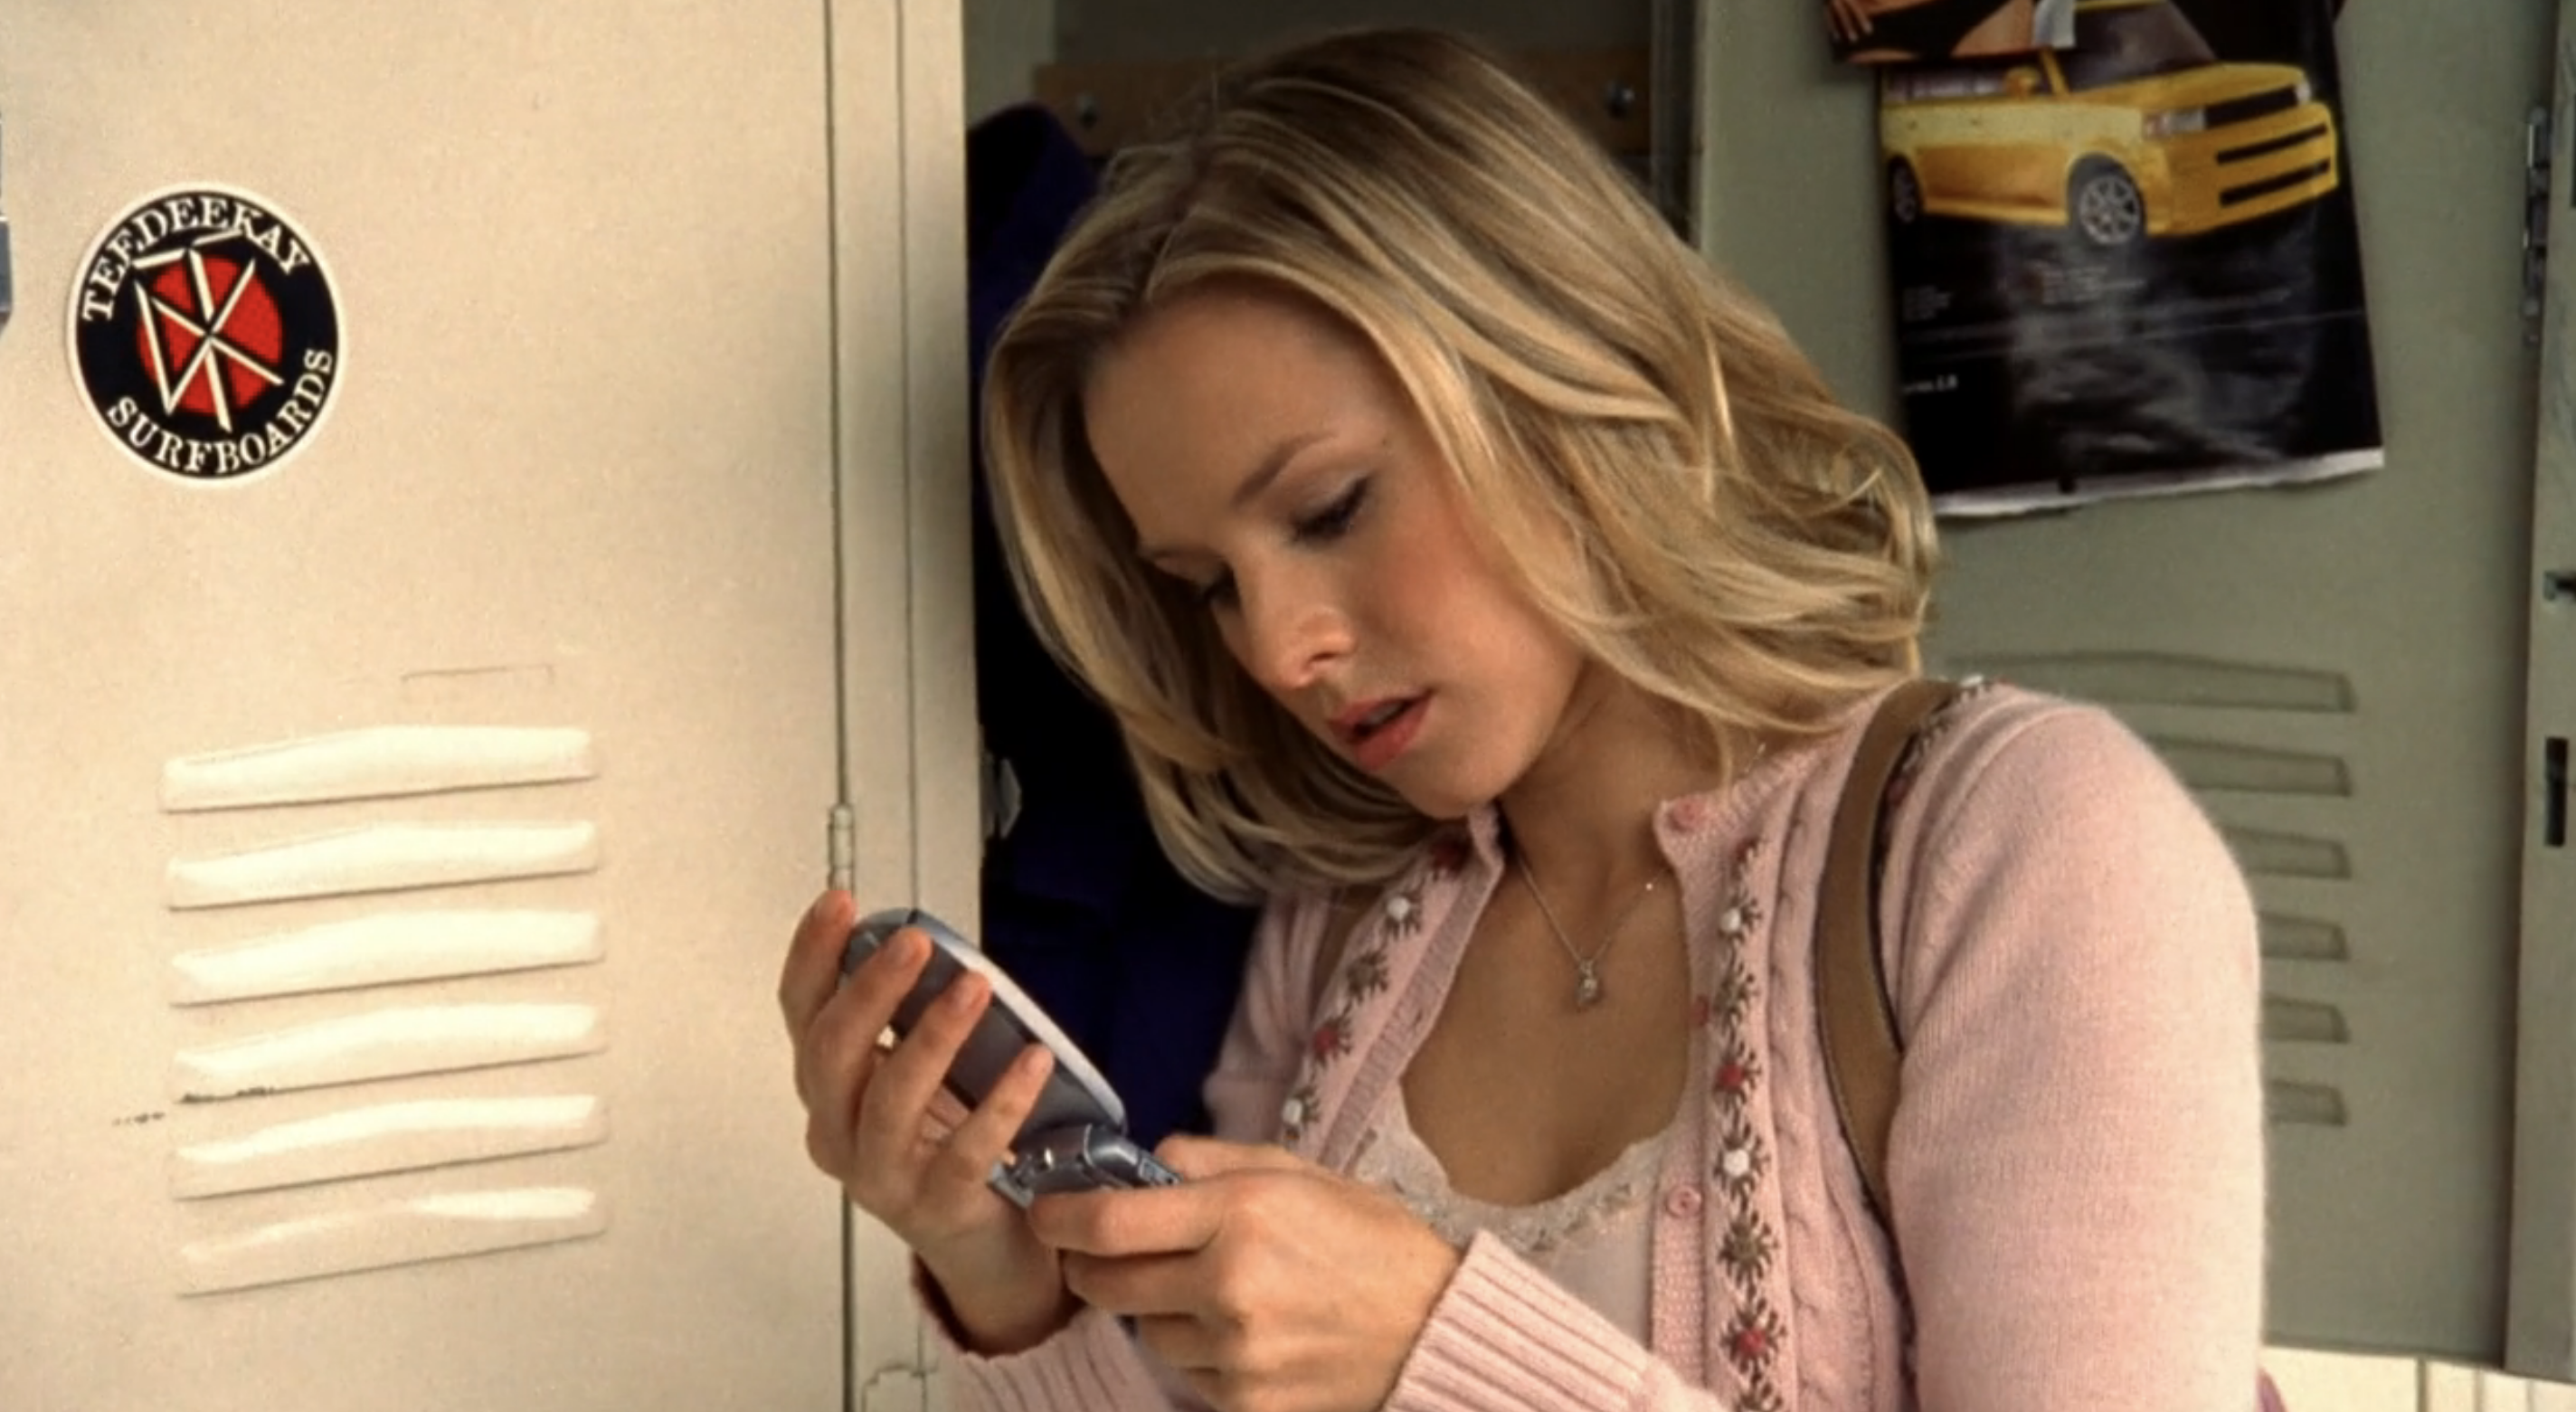 Screenshot from S1E16 of Veronica Mars. Veronica is wearing pink and standing at an open locker looking at a flip phone. To her left there's a sticker on a locker with the Dead Kennedys' logo. It says "Teedeekay Surfboards."